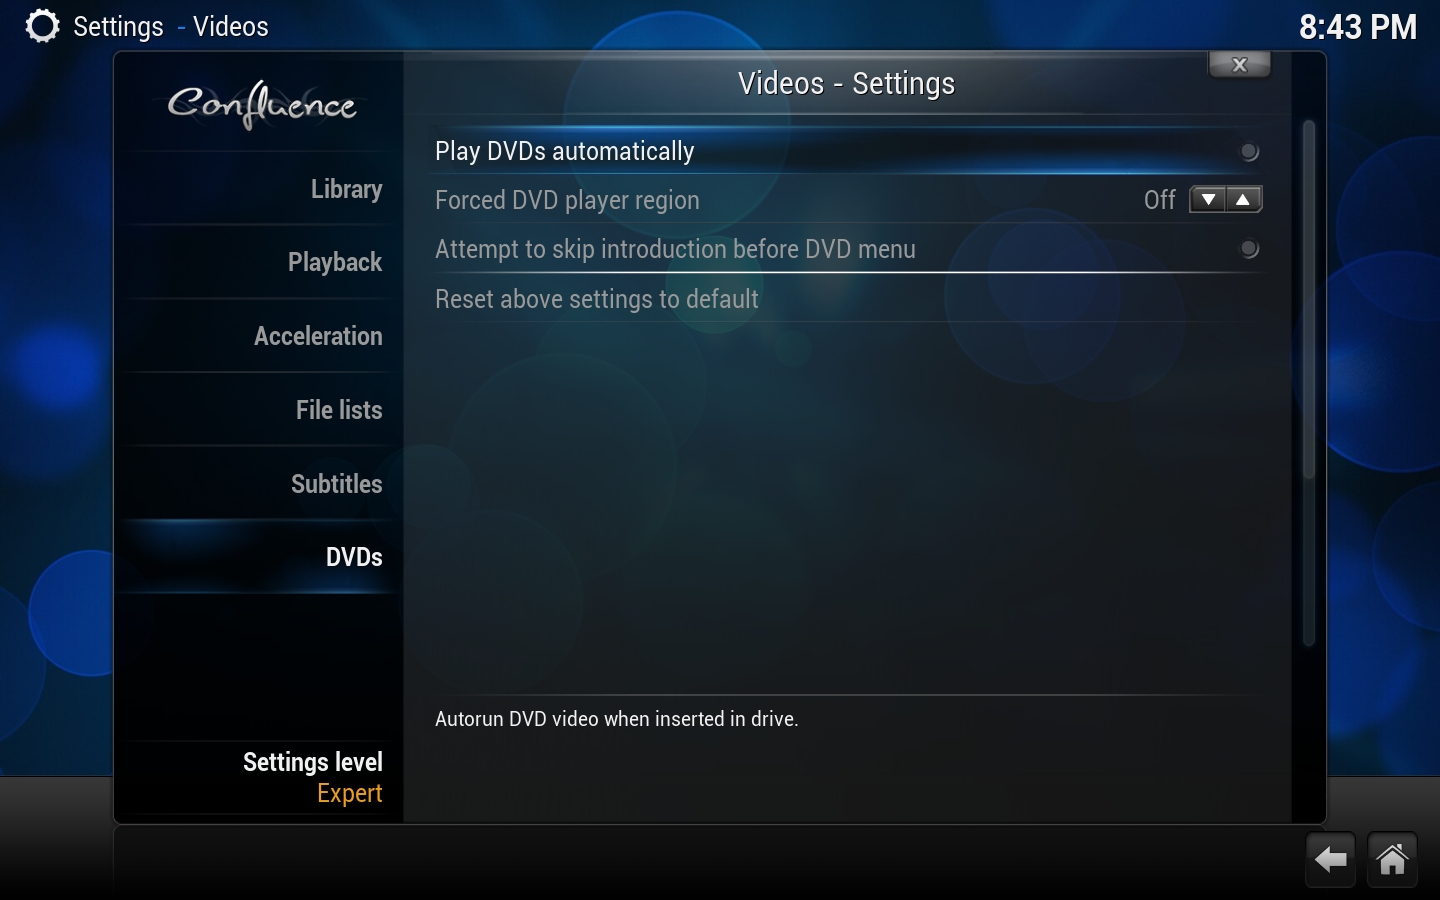 File:Settings.videos.dvds.png